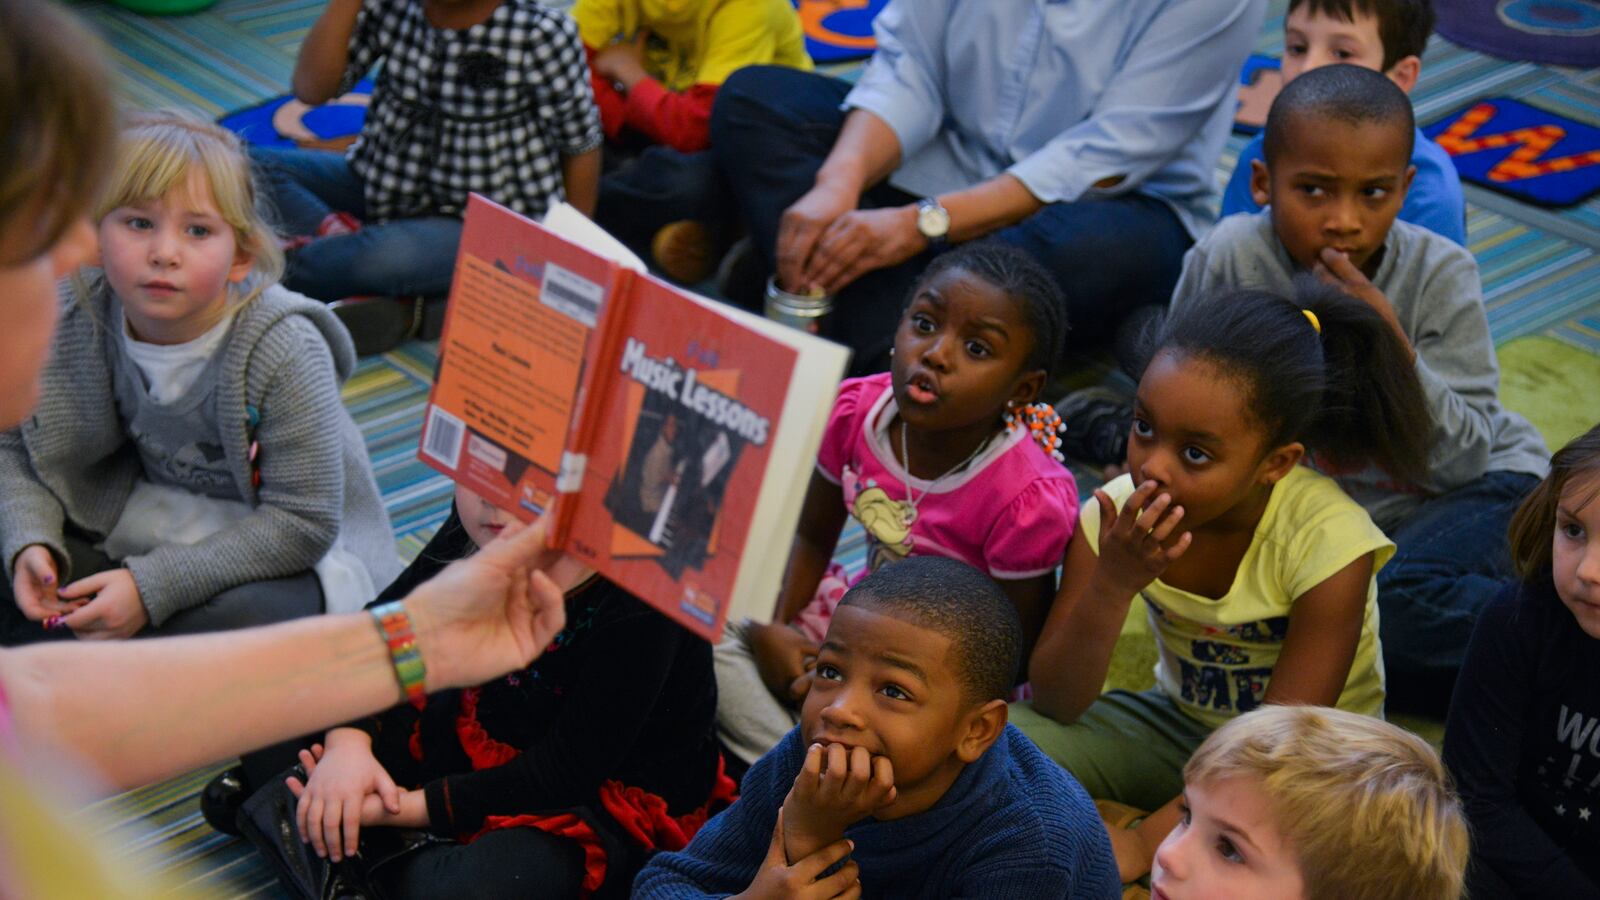 A librarian reads stories to kindergarten students at a public elementary school in Washington, D.C. in February 2015.